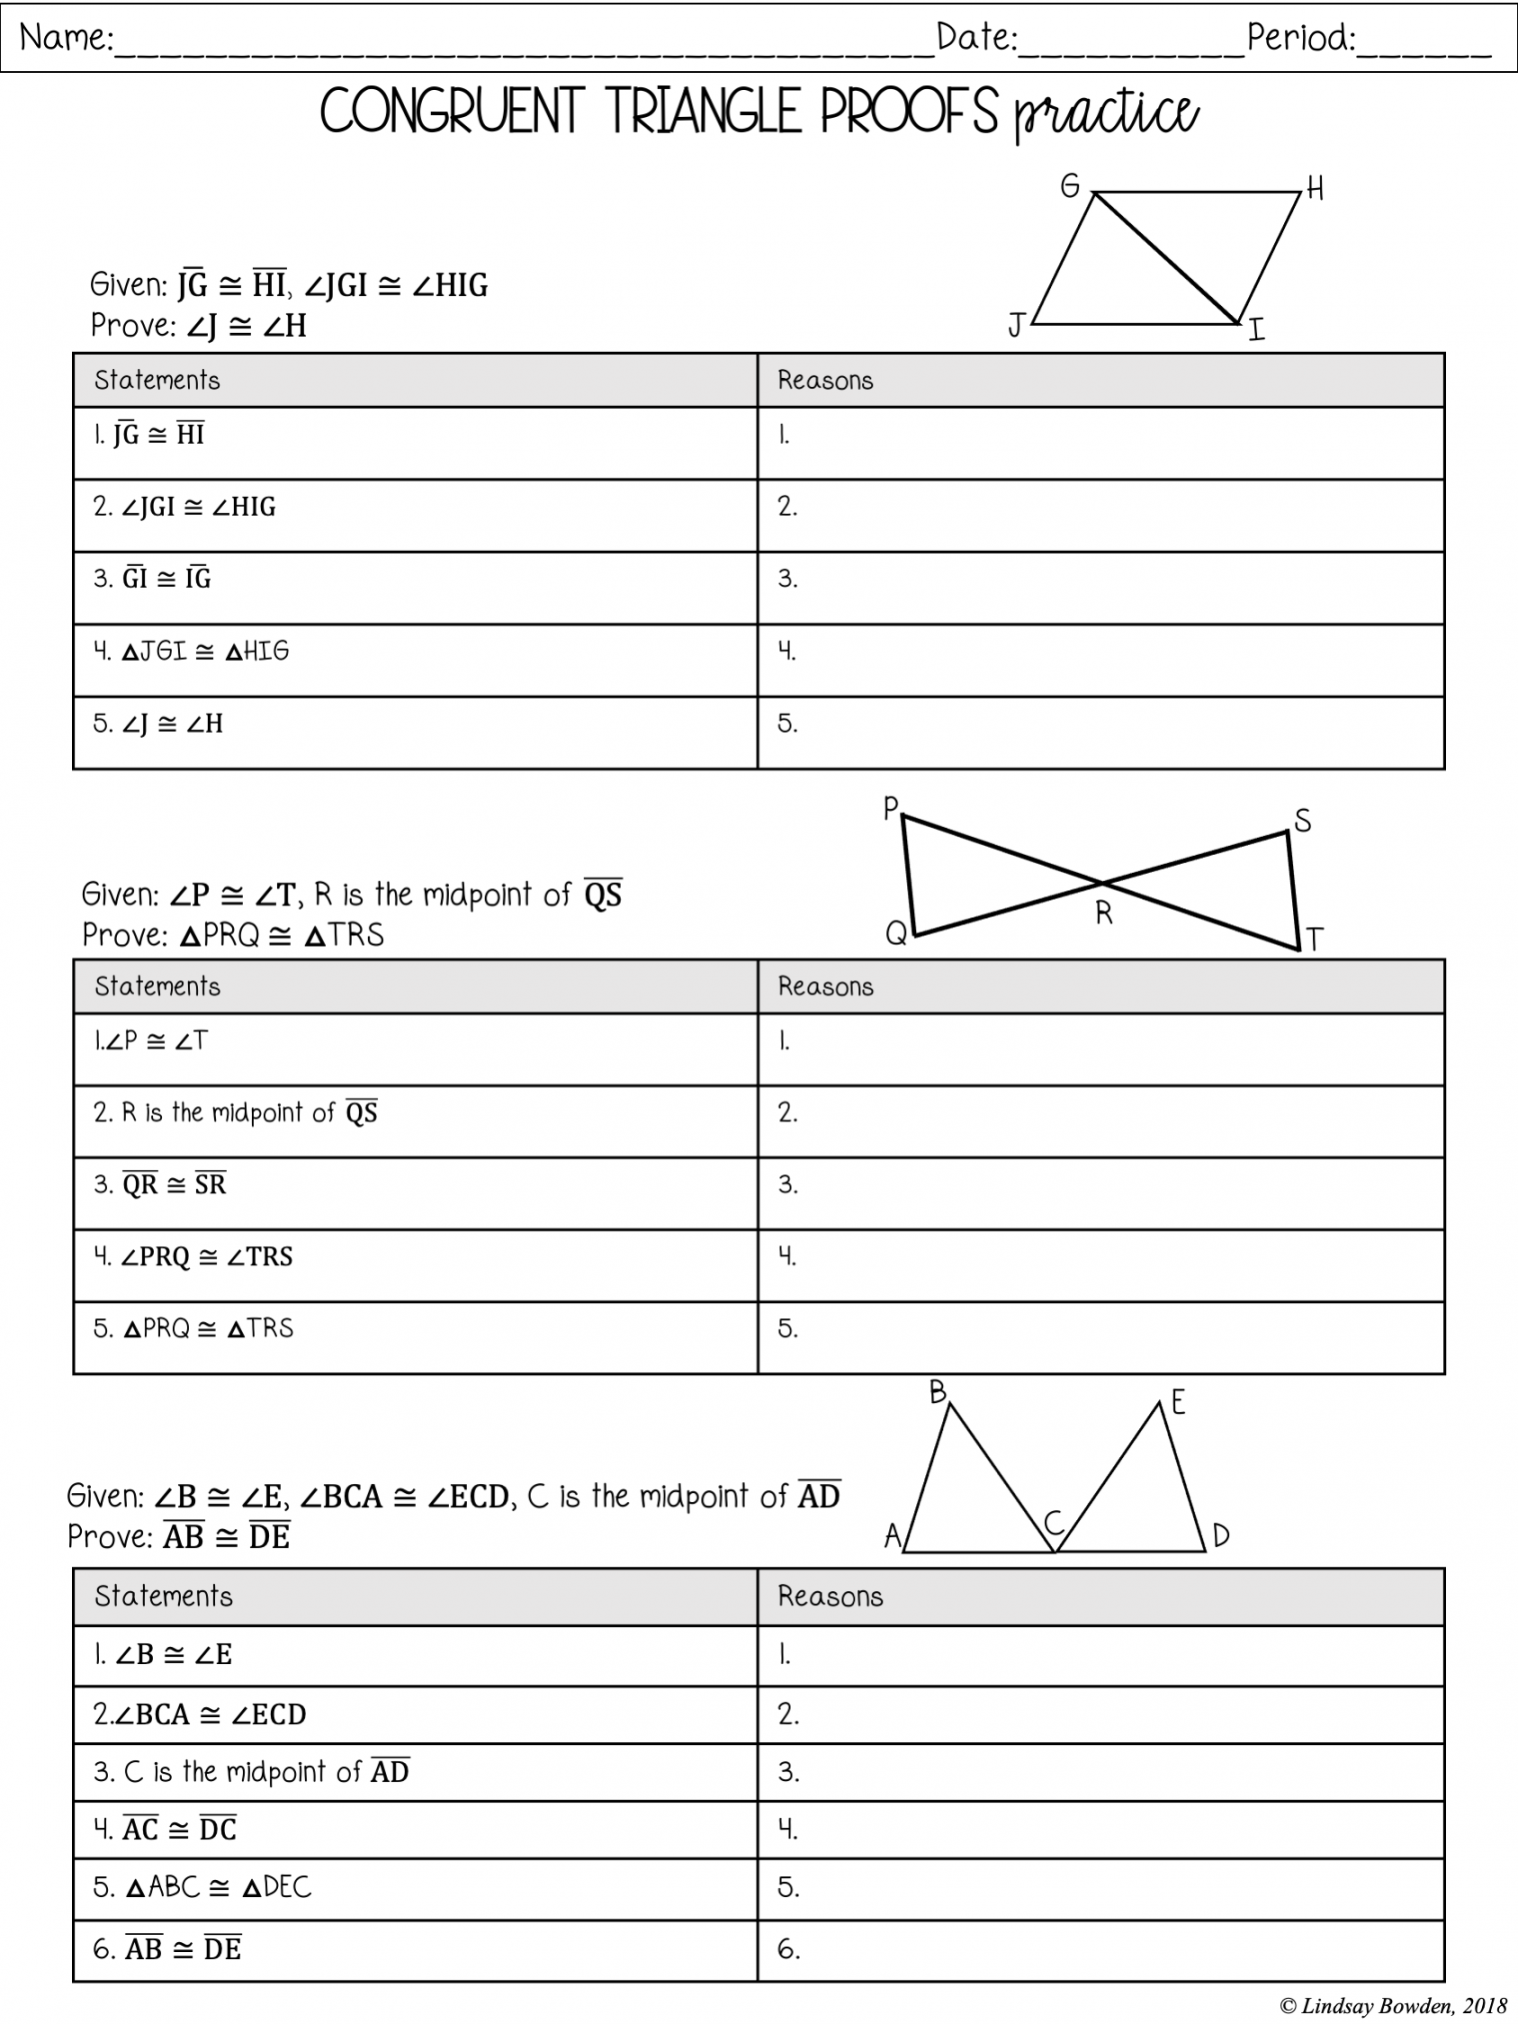 Congruent Triangles Notes and Worksheets - Lindsay Bowden